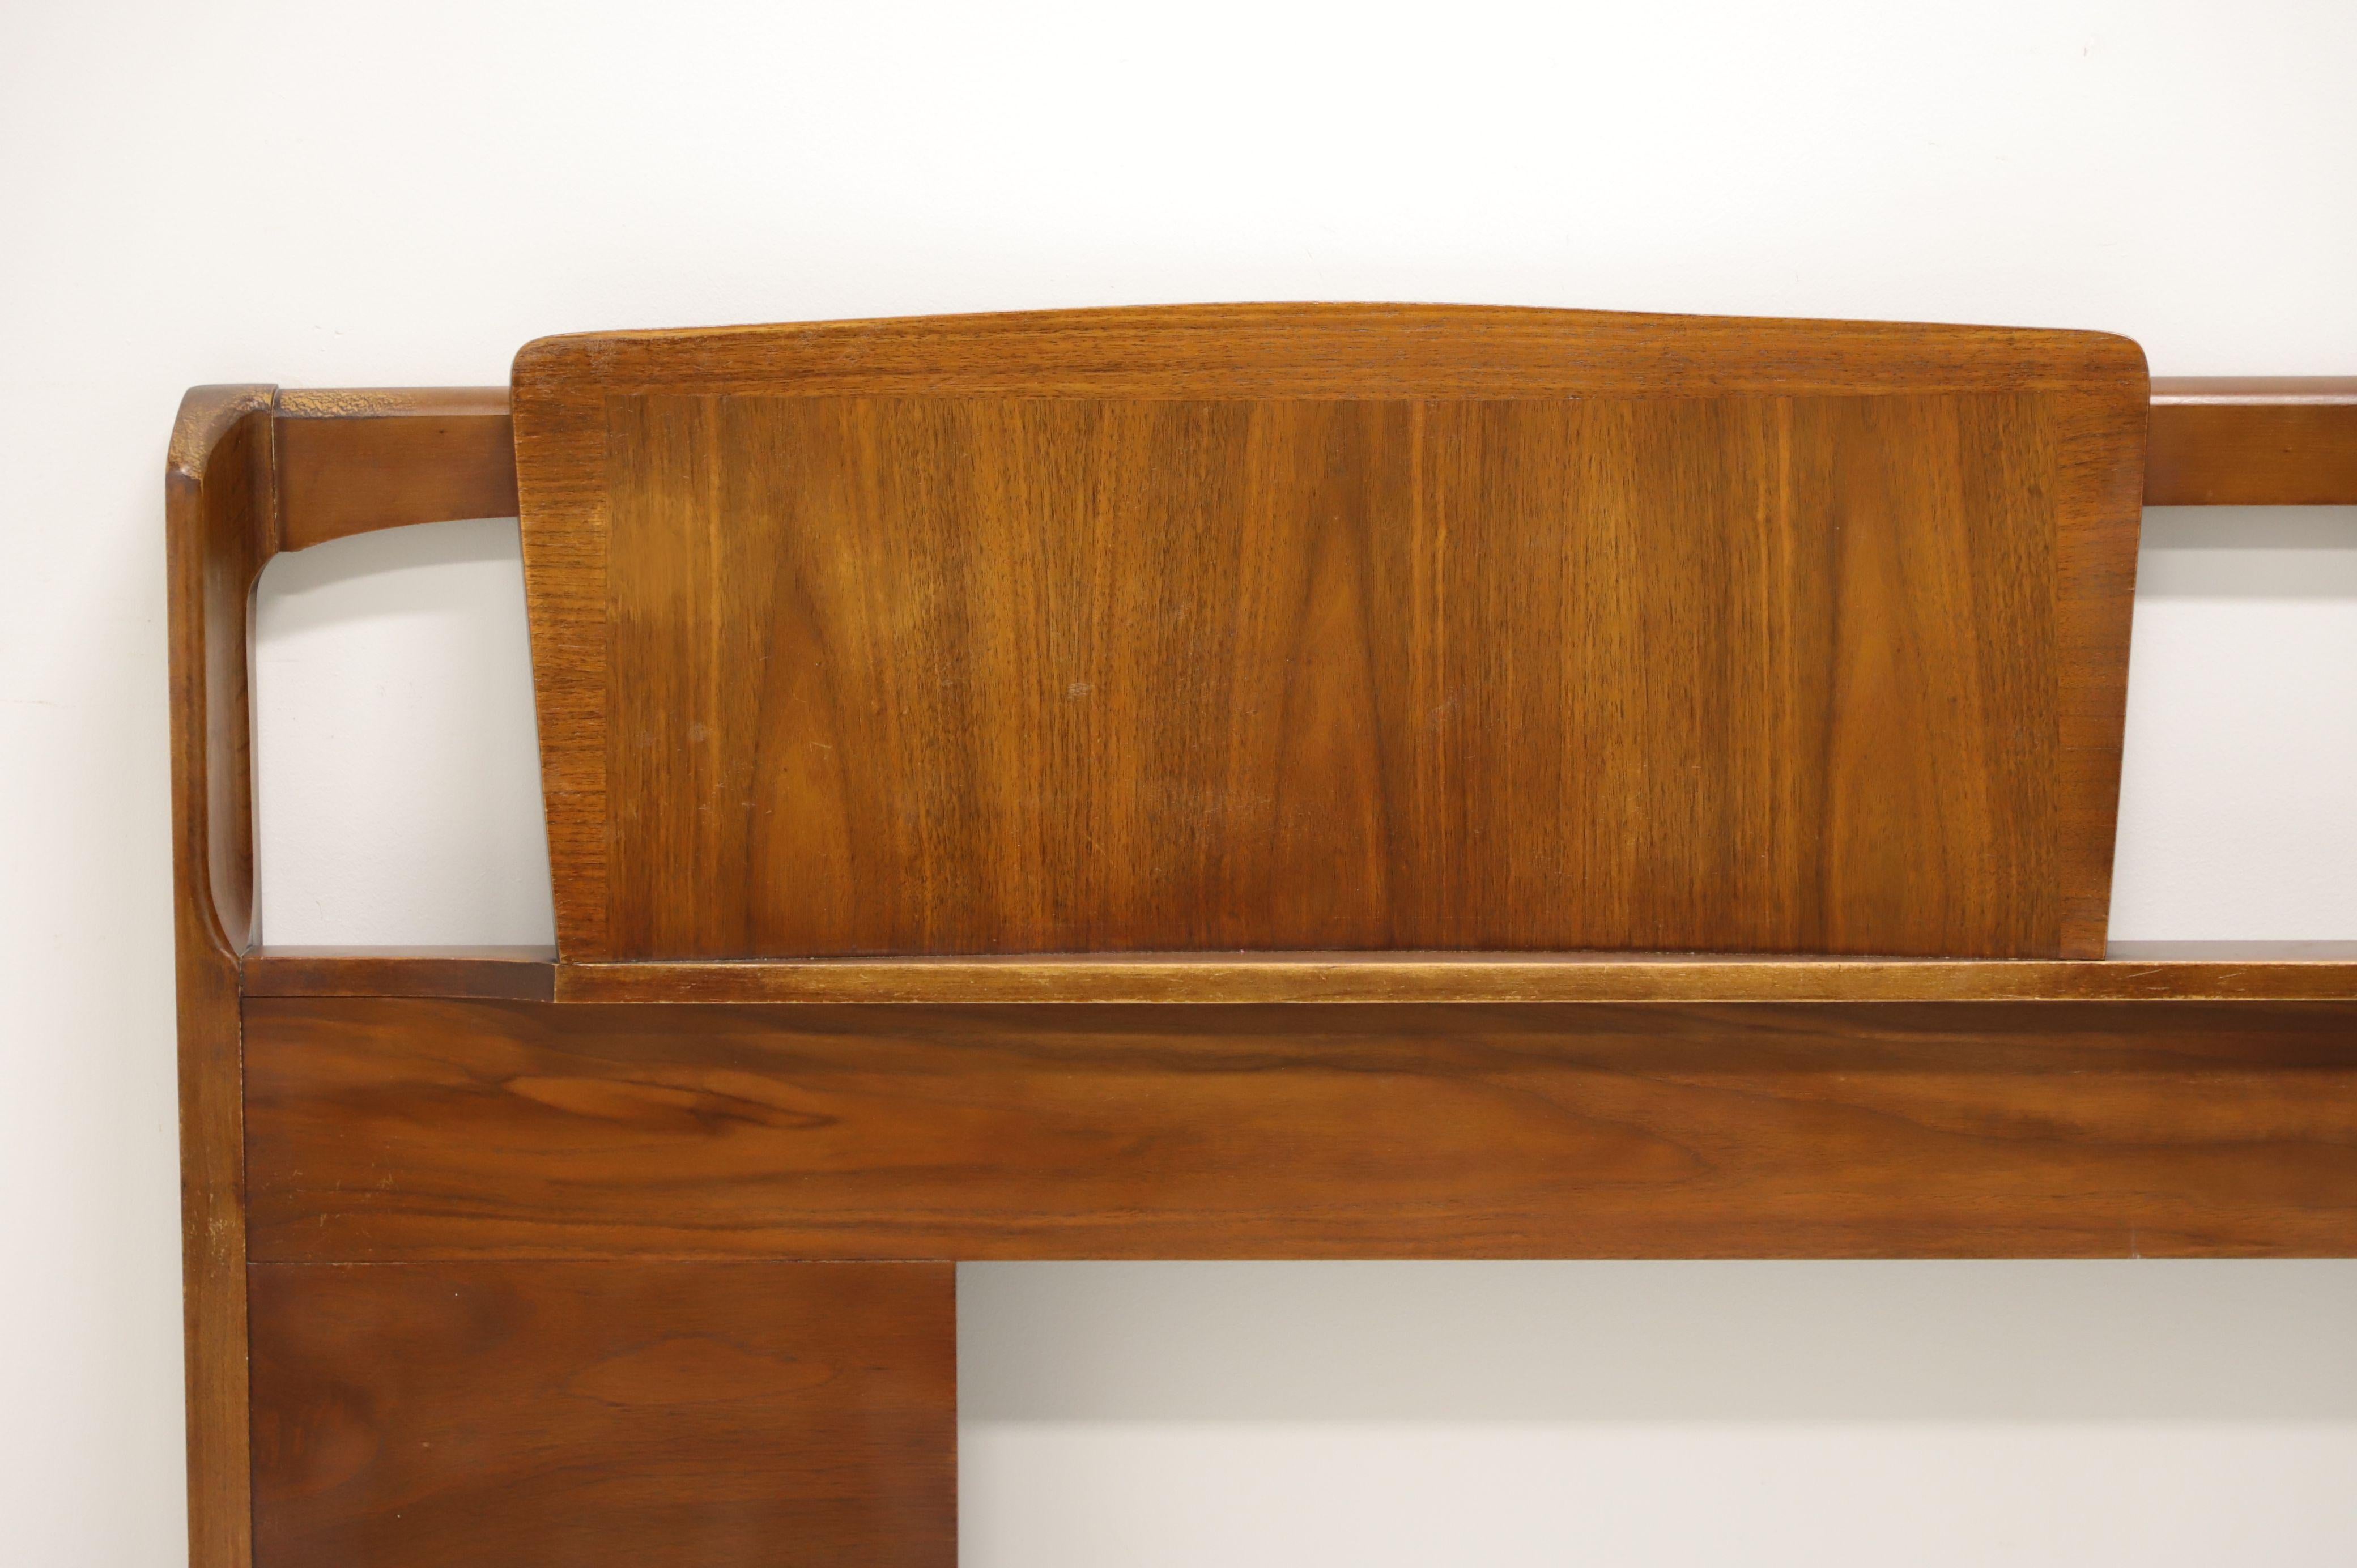 A Mid Century Modern king size headboard by Kent Coffey, of Lenoir, North Carolina, USA, from their Impact line. Solid walnut with banded dual panel headrest panels and metal brackets for attaching to a frame. Made in the mid 20th Century. 

Style